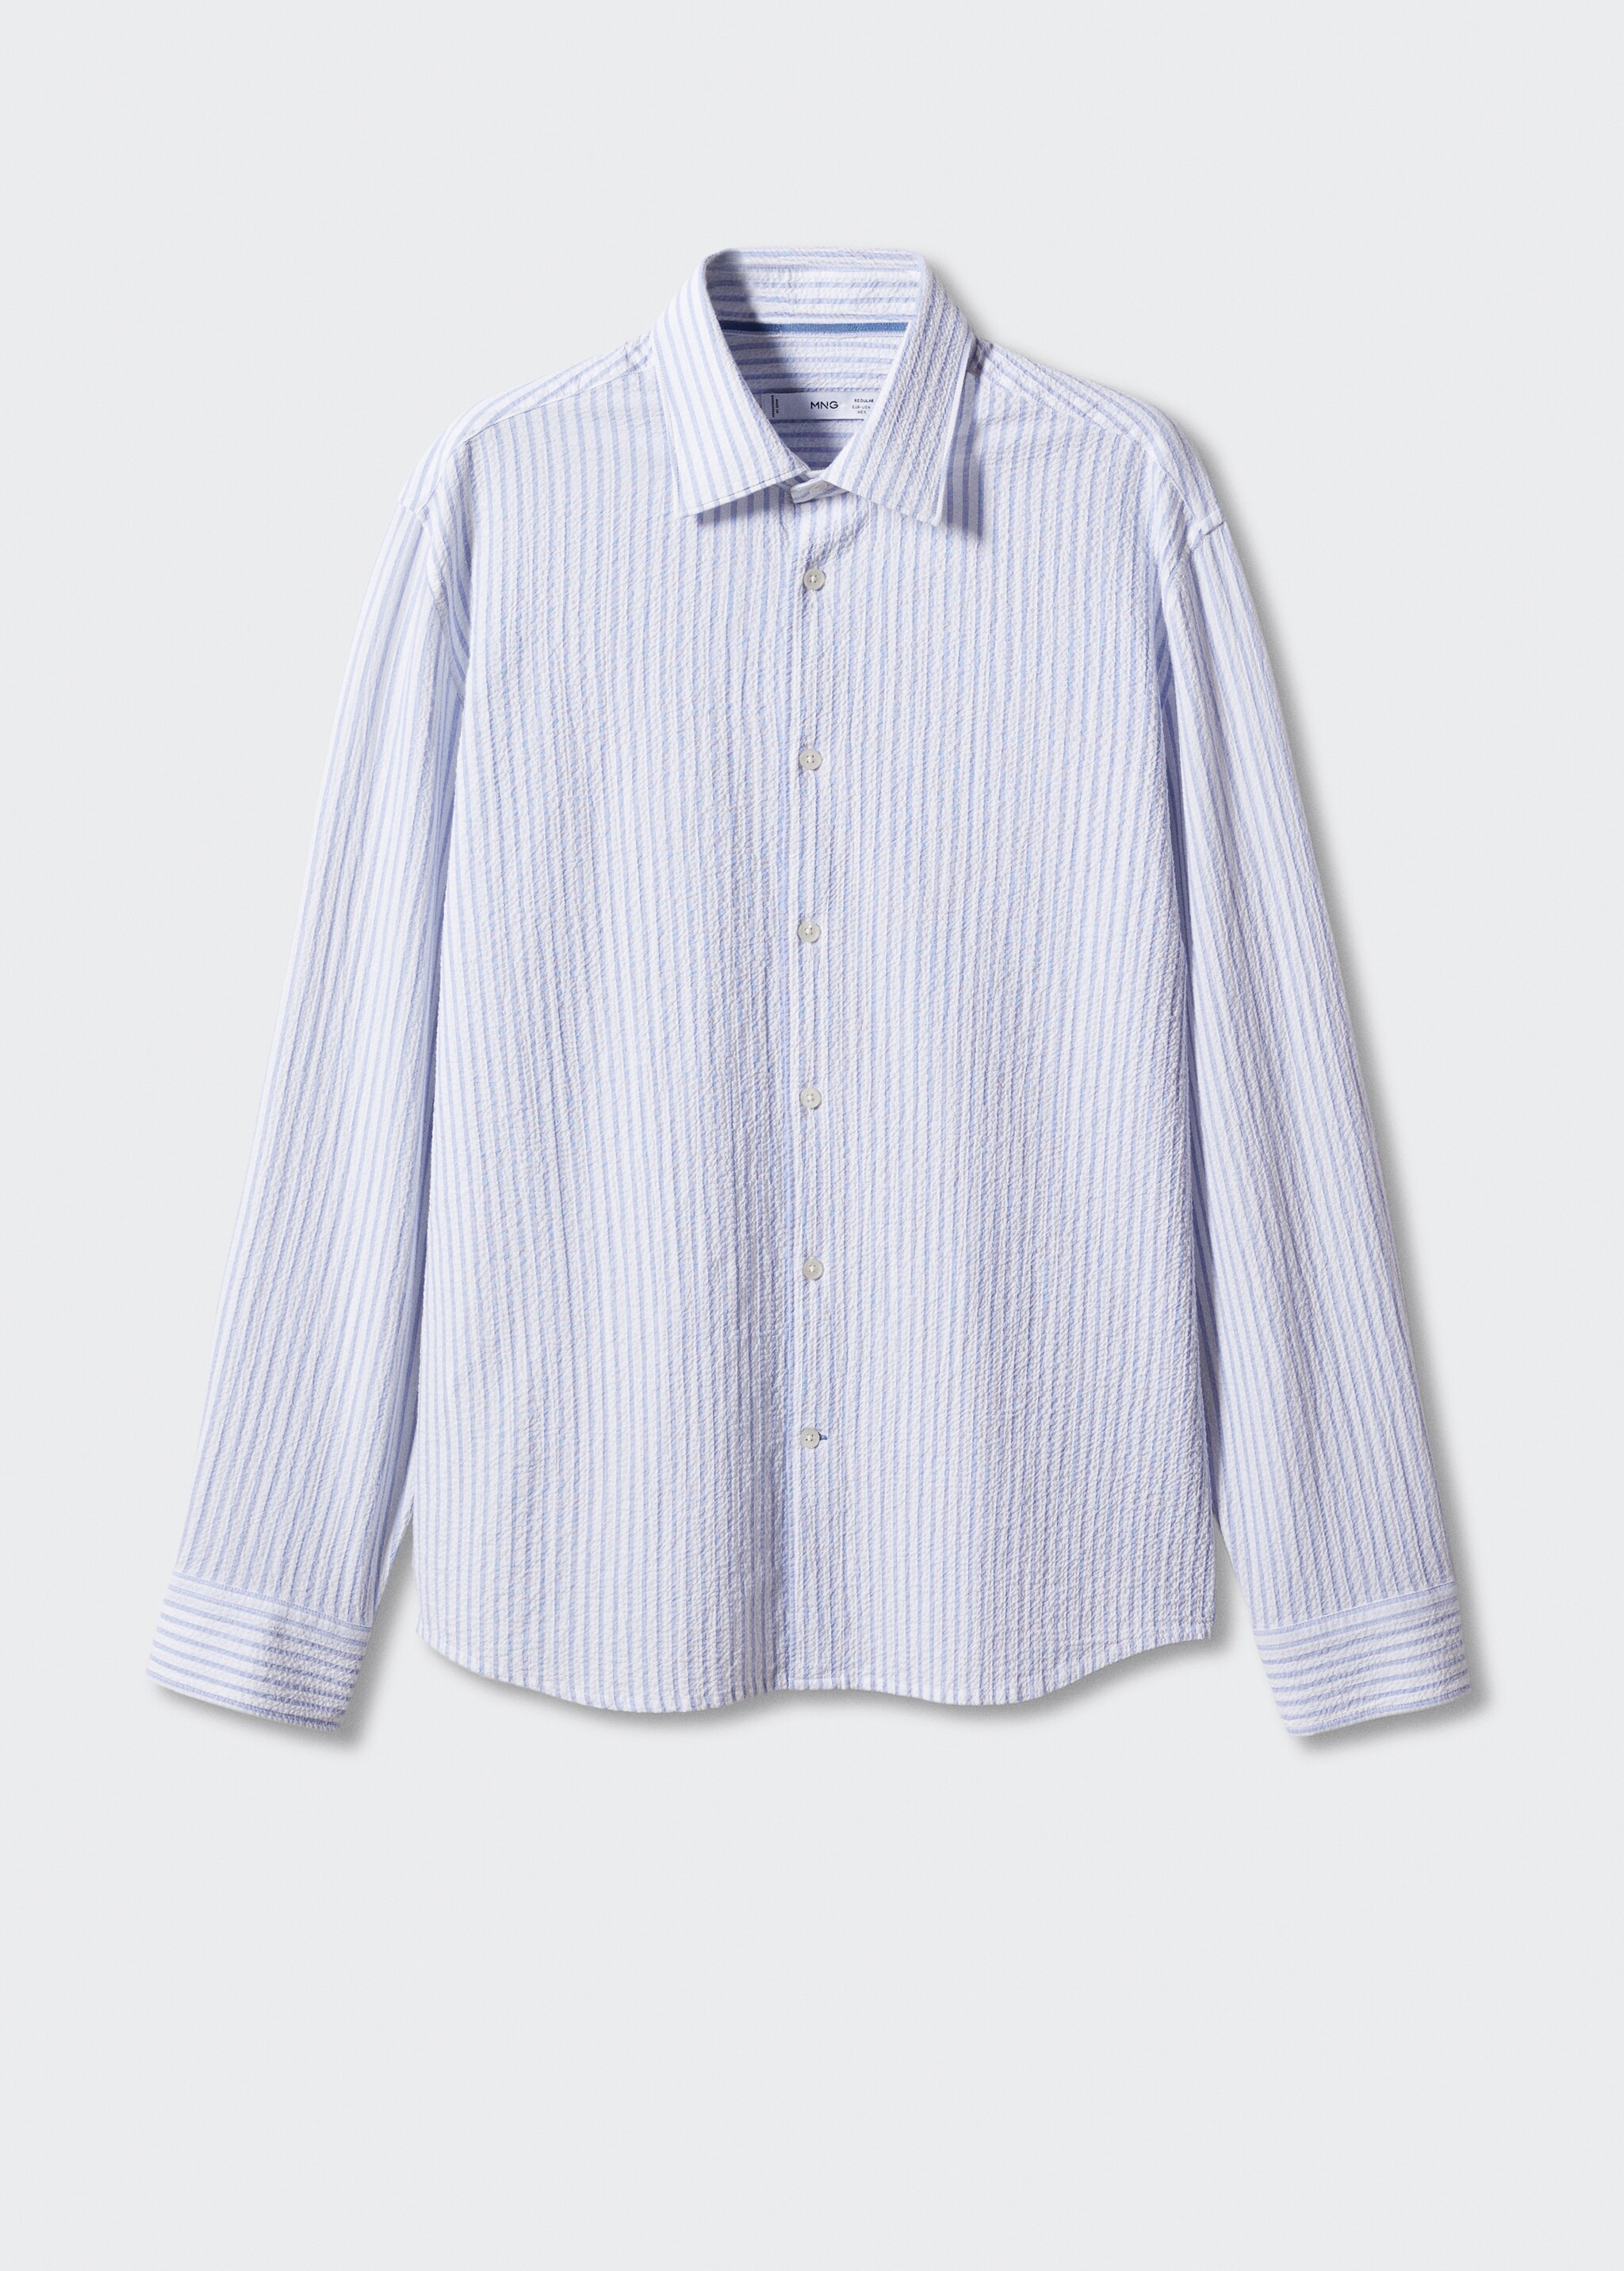 100% cotton seersucker striped shirt - Article without model